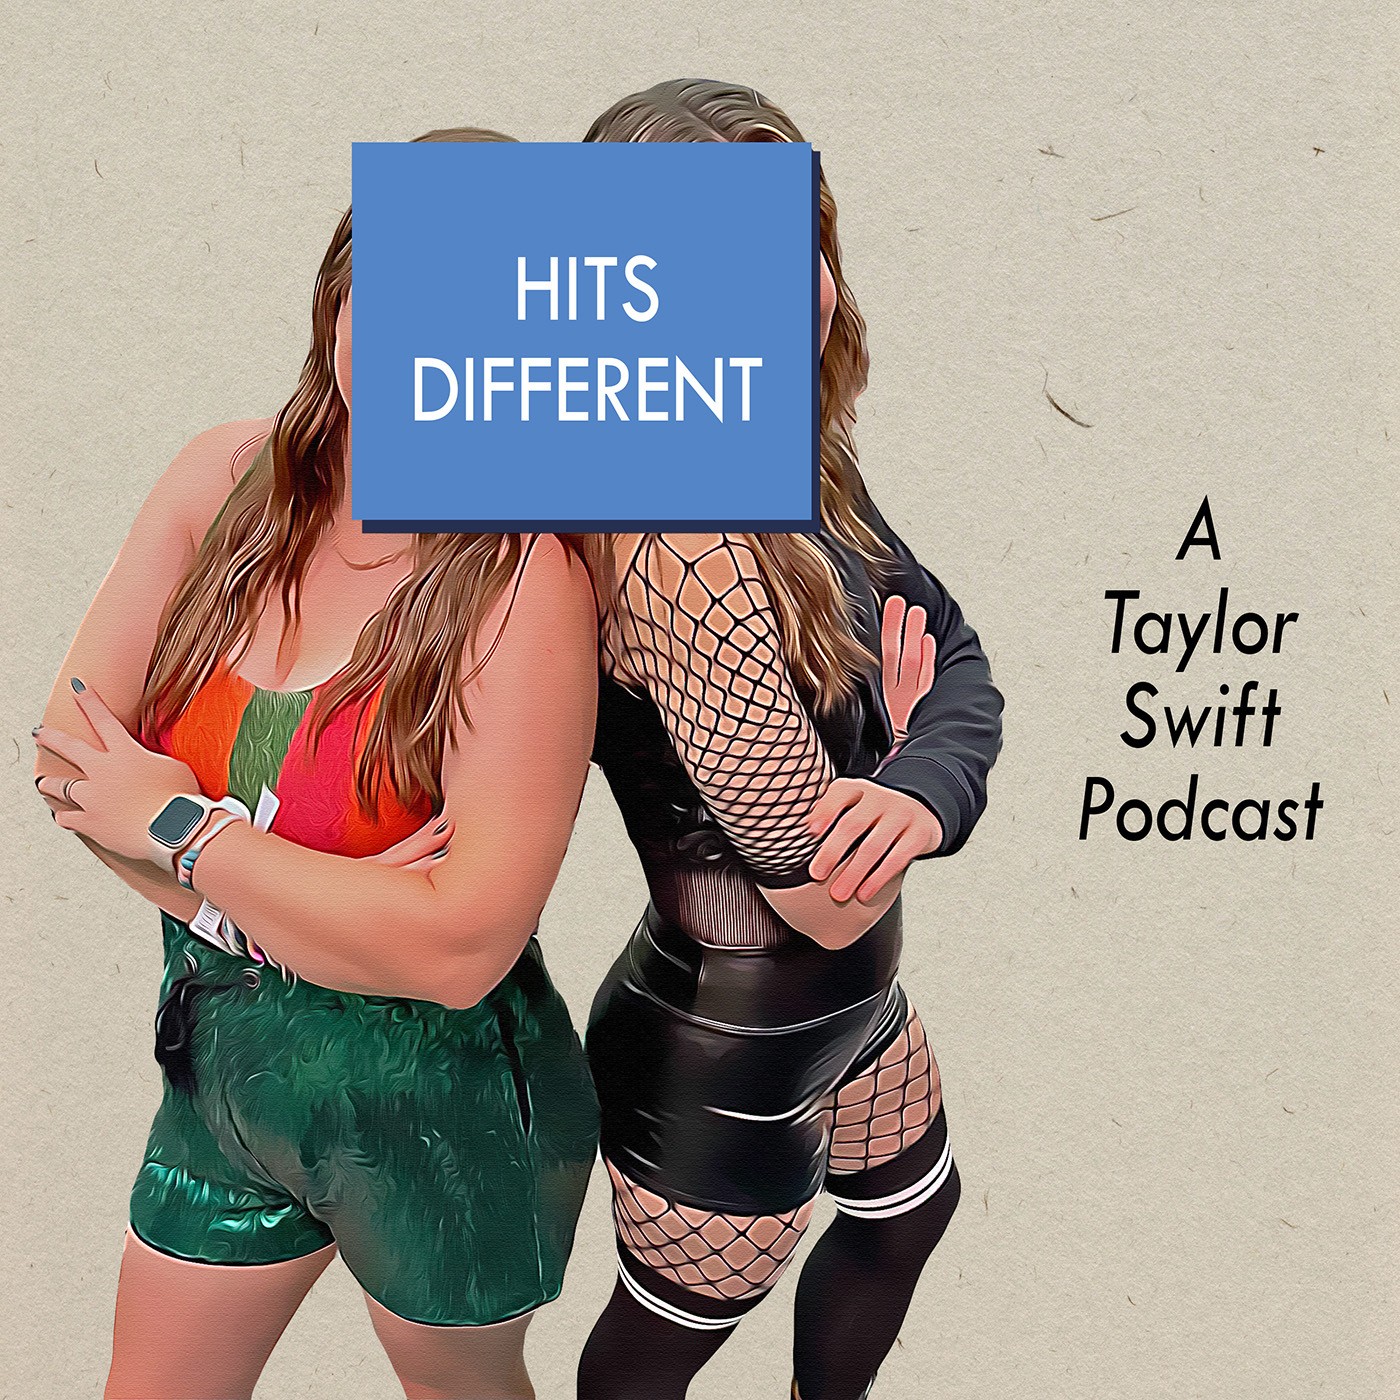 Hits Different: A Taylor Swift Podcast